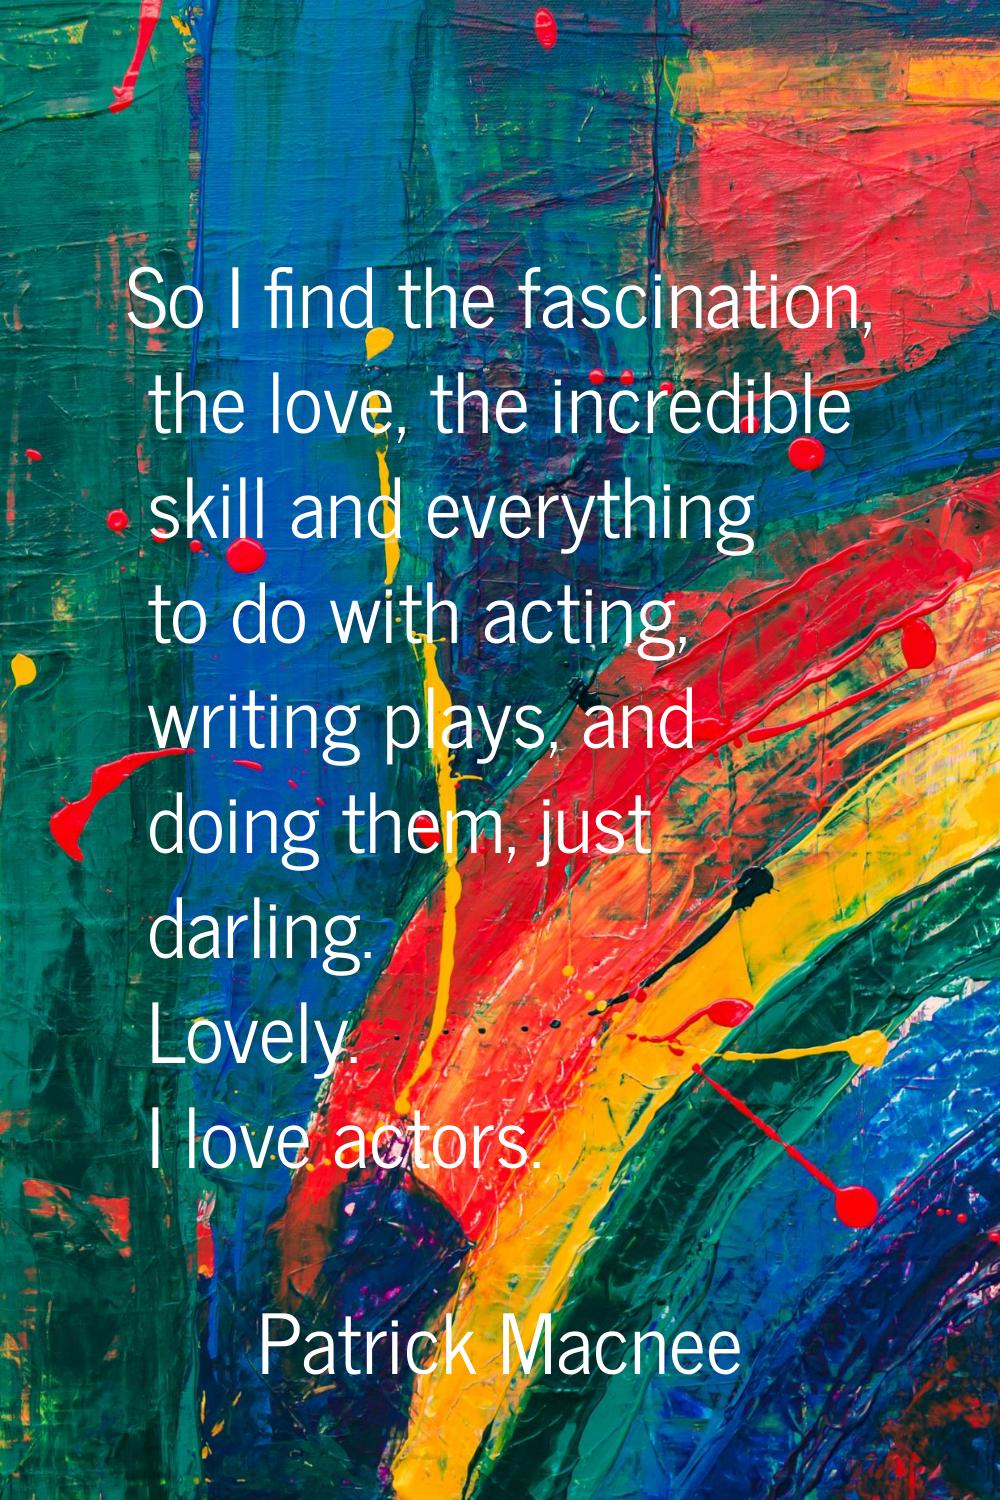 So I find the fascination, the love, the incredible skill and everything to do with acting, writing